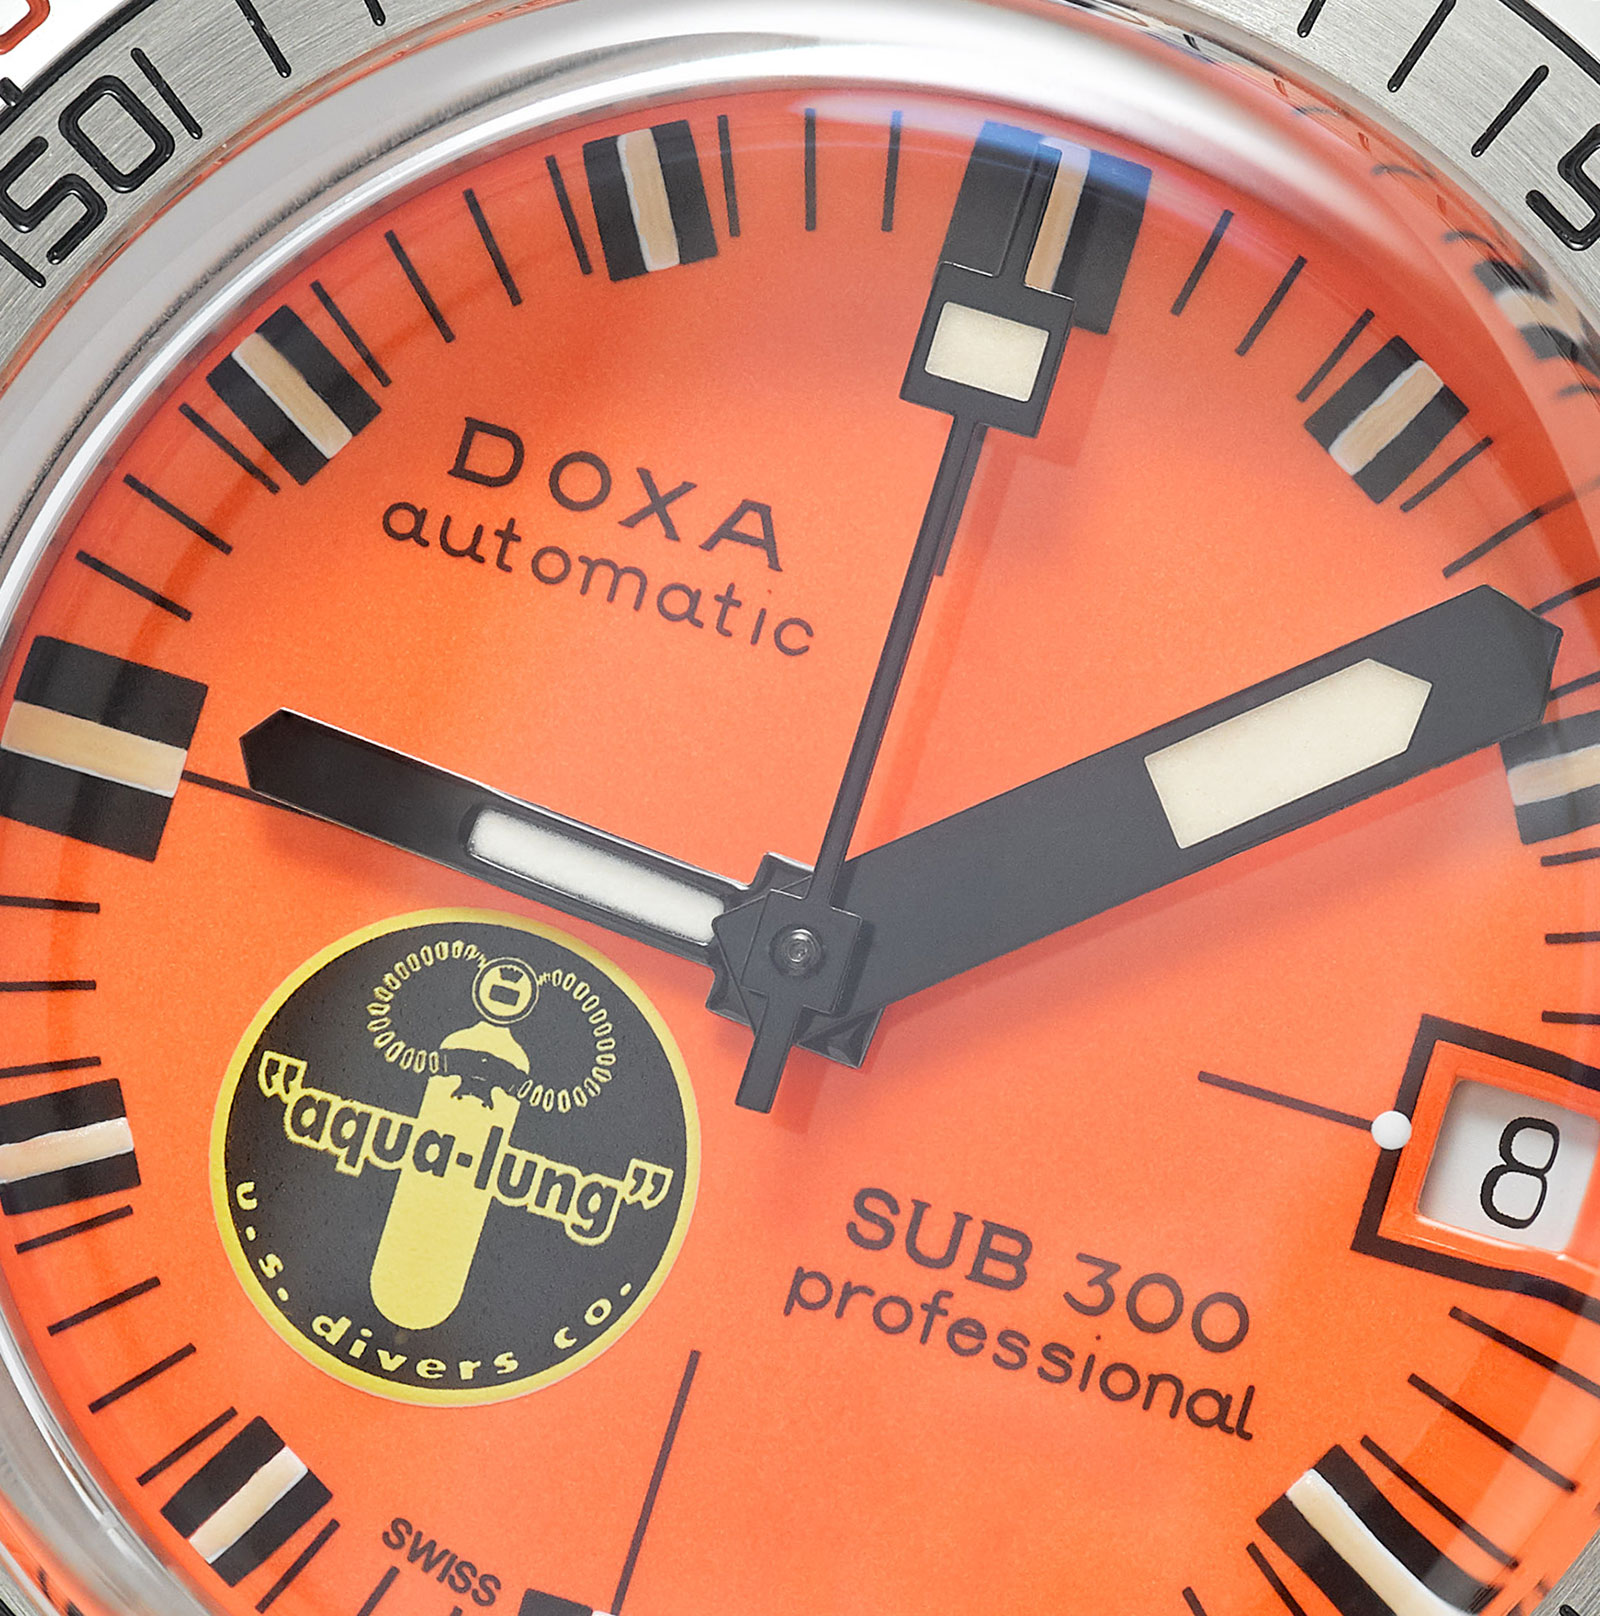 Doxa Black Lung limited edition